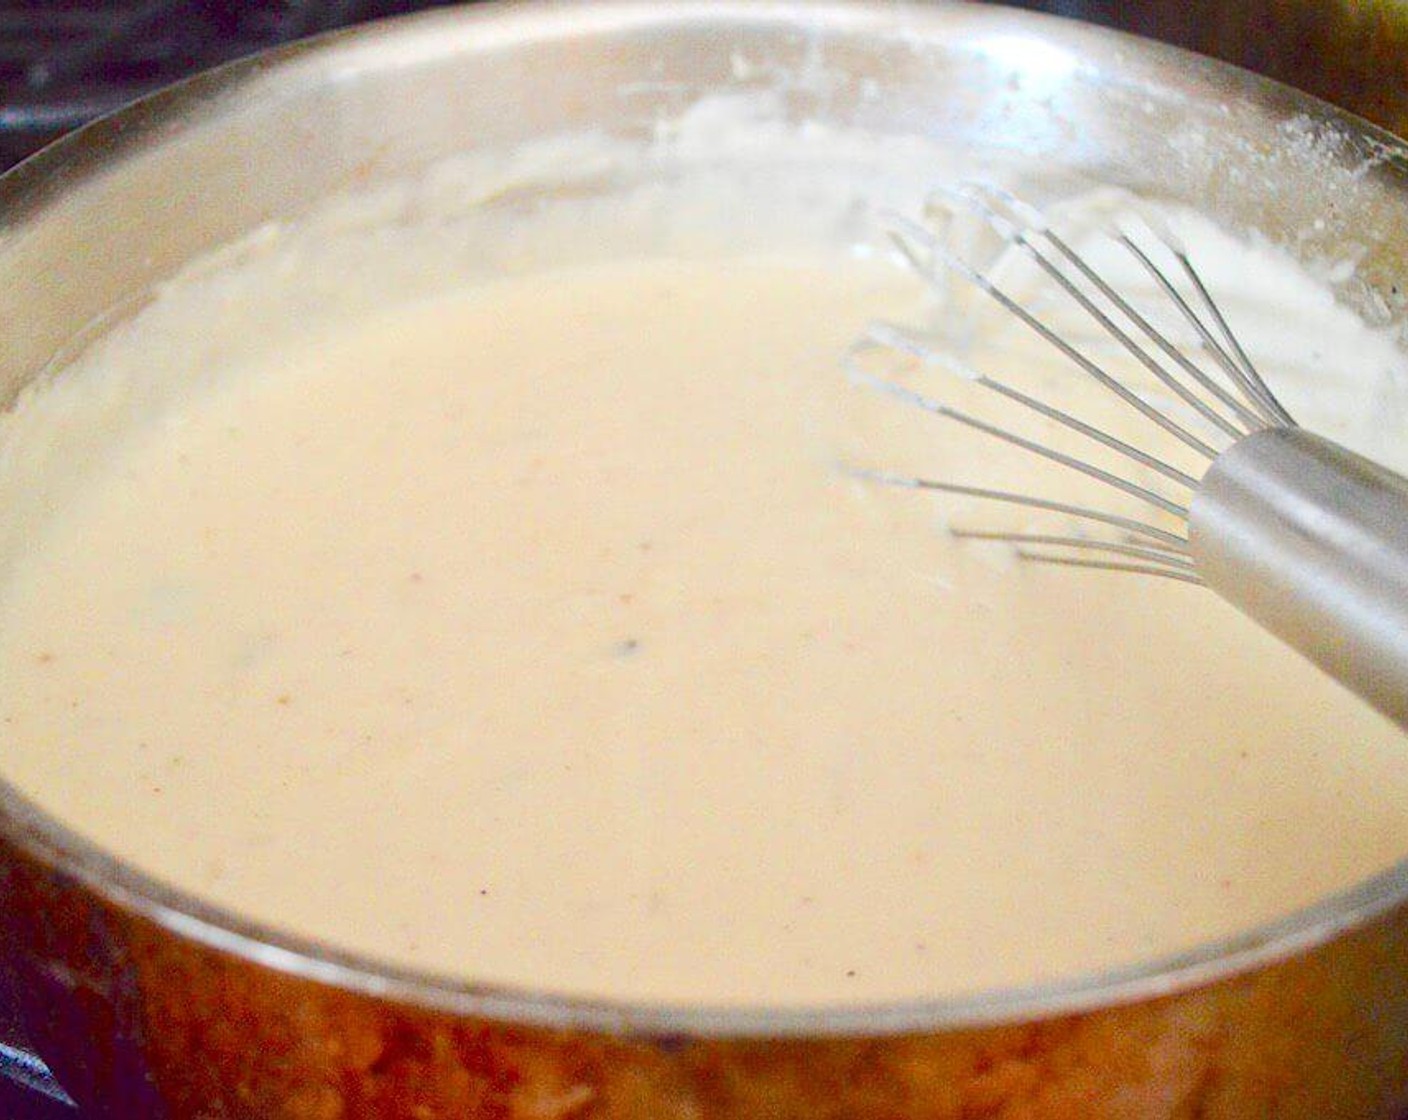 step 5 Then whisk in the Dijon Mustard (1 Tbsp), Ground Nutmeg (1 pinch), and an extra pinch of Salt (1 pinch). Let the sauce gently bubble and thicken for 10 minutes, whisking it occasionally.